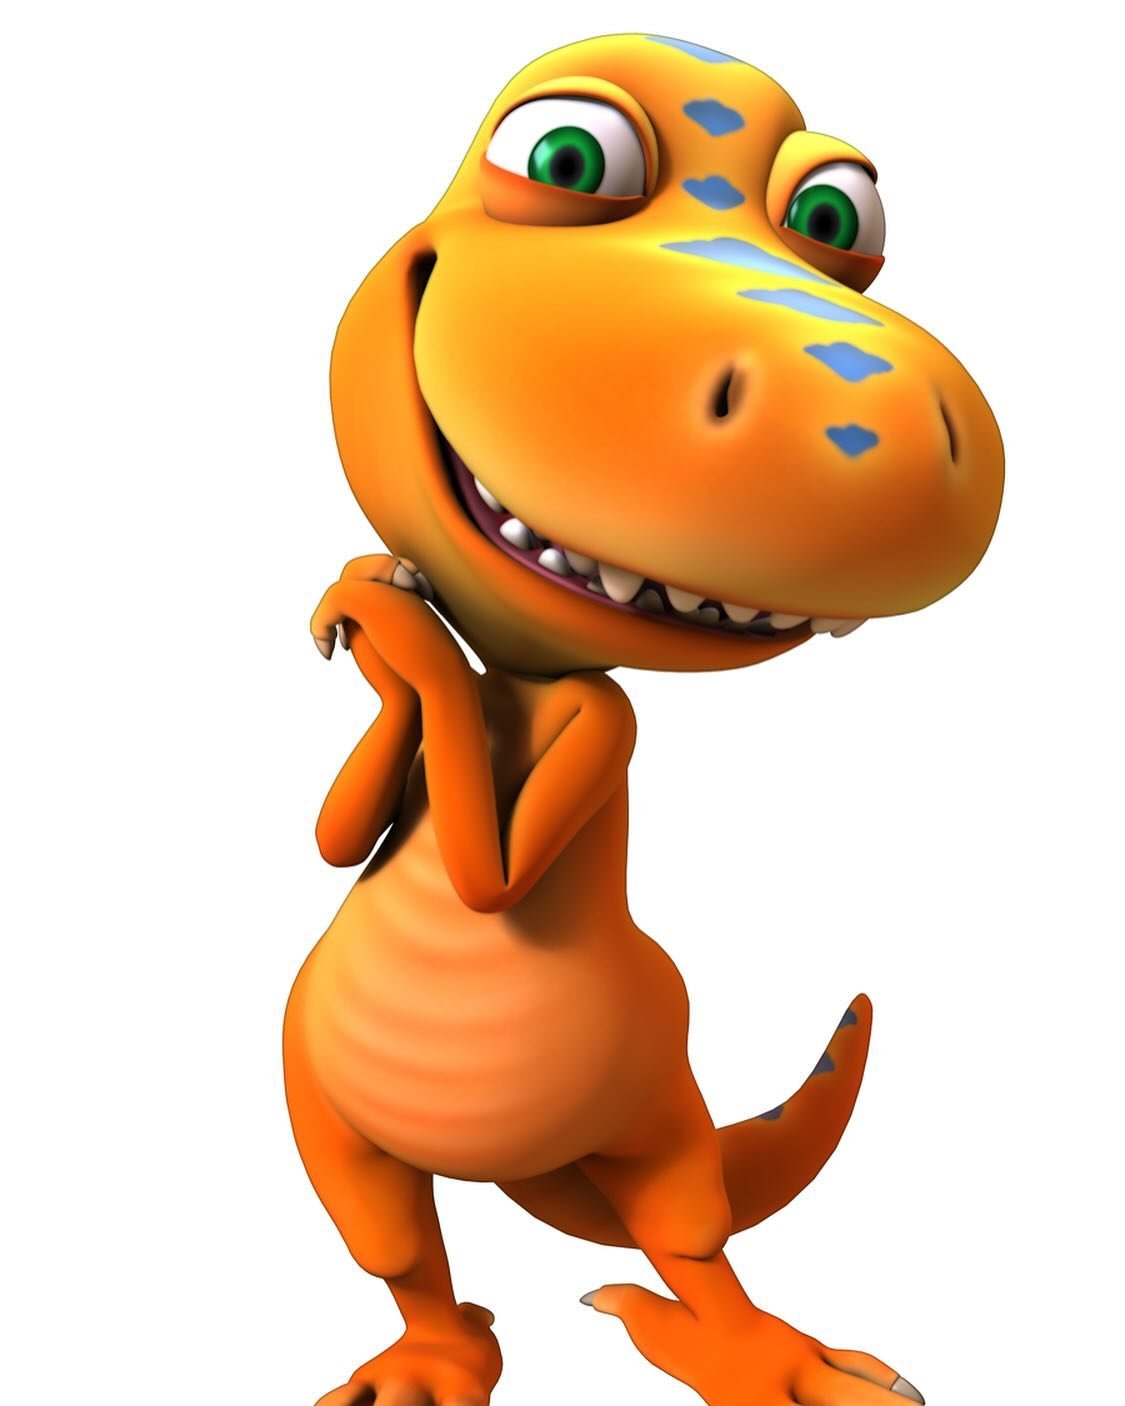 Join us and the Autry Museum for a Meet + Greet with Buddy from Dinosaur Train on Sunday, May 5th every hour on the hour beginning at 10am until 2pm inside the Autry Museum.

Plus, reminder ALL festival guests receive free access to the Autry Museum 